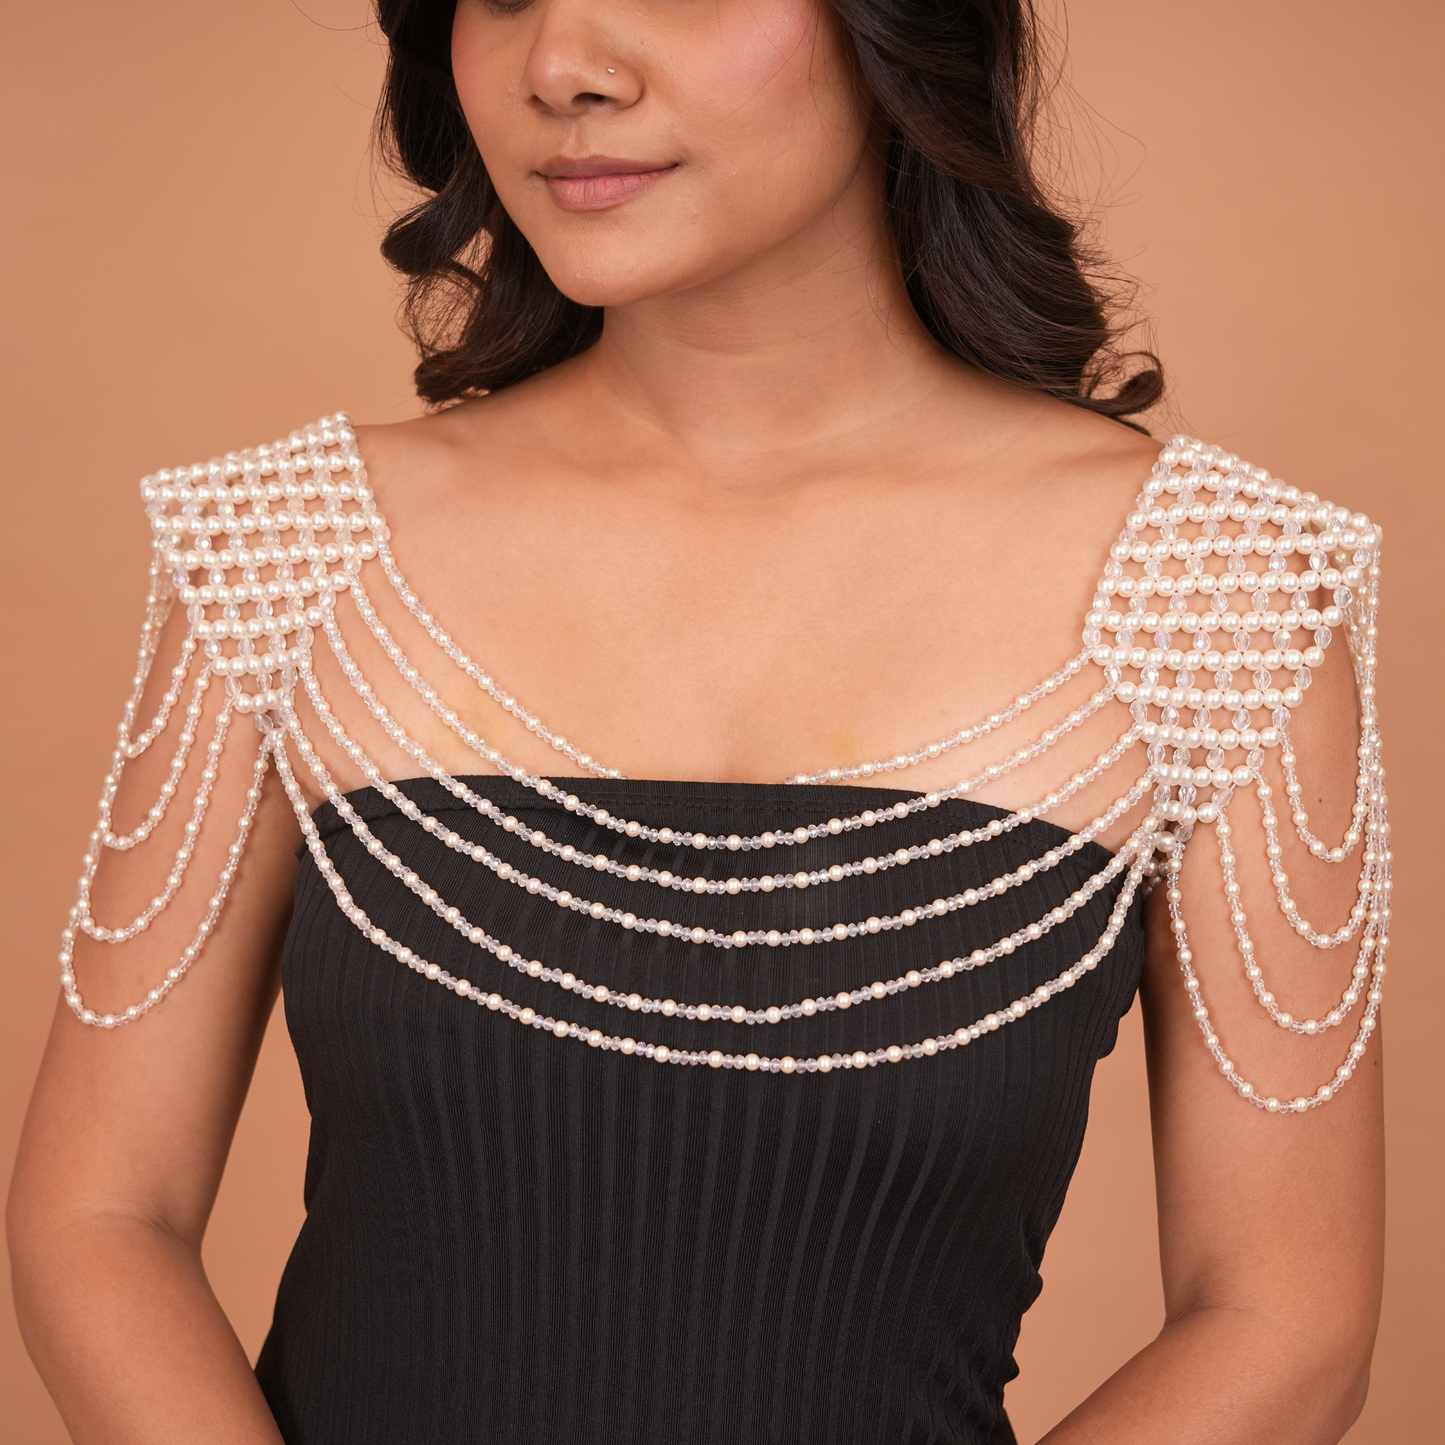 Elegant Simulated Pearl Shoulder and Chest Chain Necklace for Nightclubs and Brides